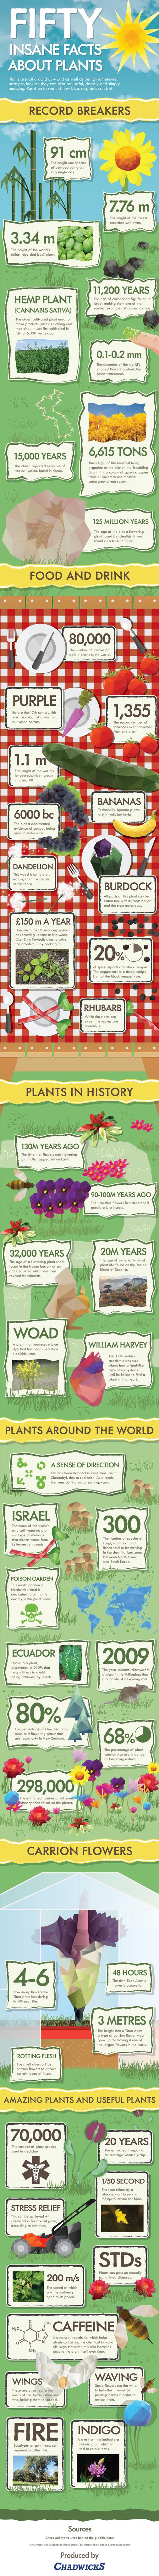 50-facts-about-plants